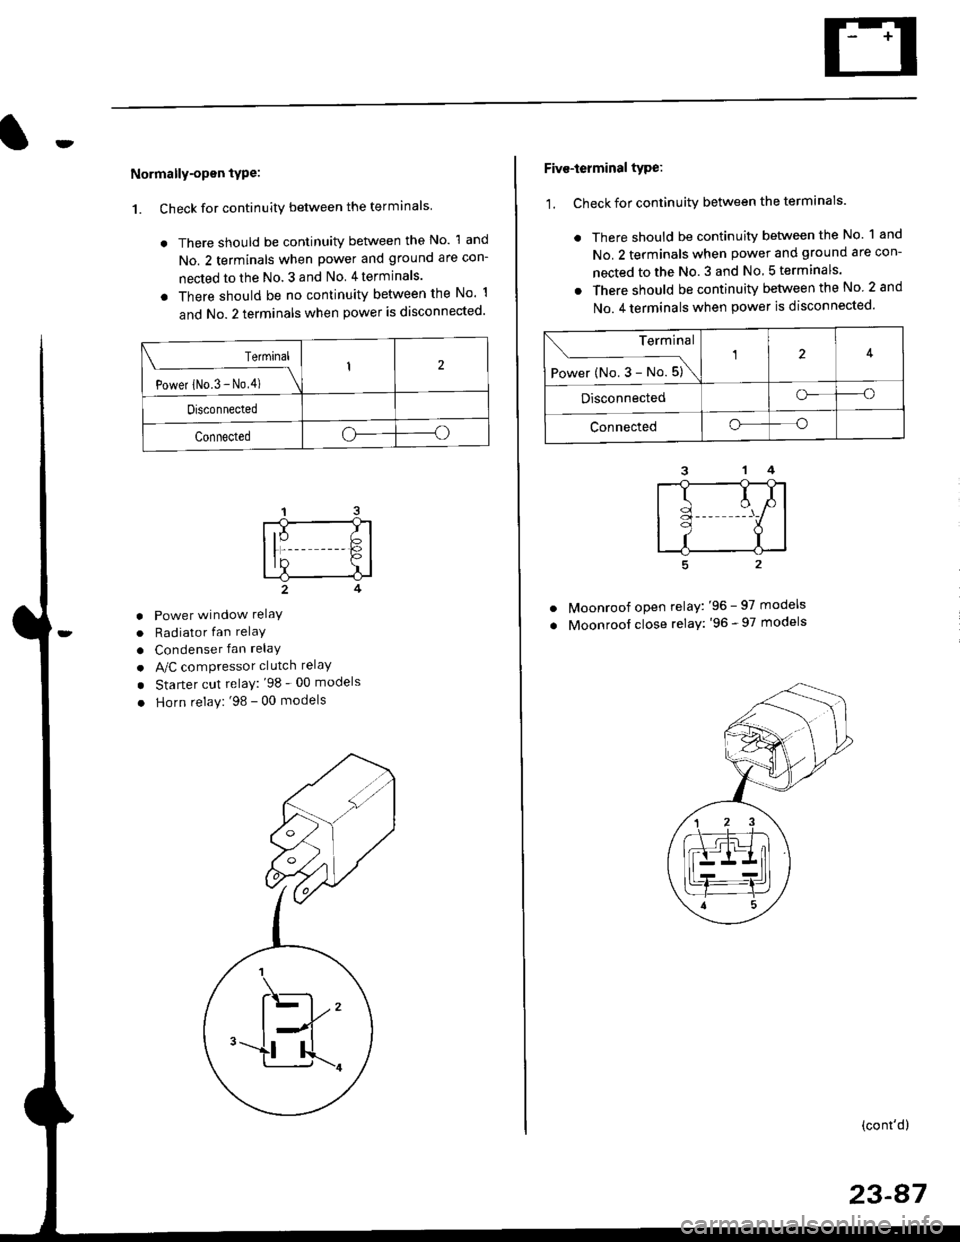 HONDA CIVIC 1996 6.G Manual PDF Normally-opsn tYPe:
1. Check for continuity between the terminals
. There should be continuity between the No. 1 and
No. 2 terminals when power and ground are con-
nected to the No. 3 and No 4terminal